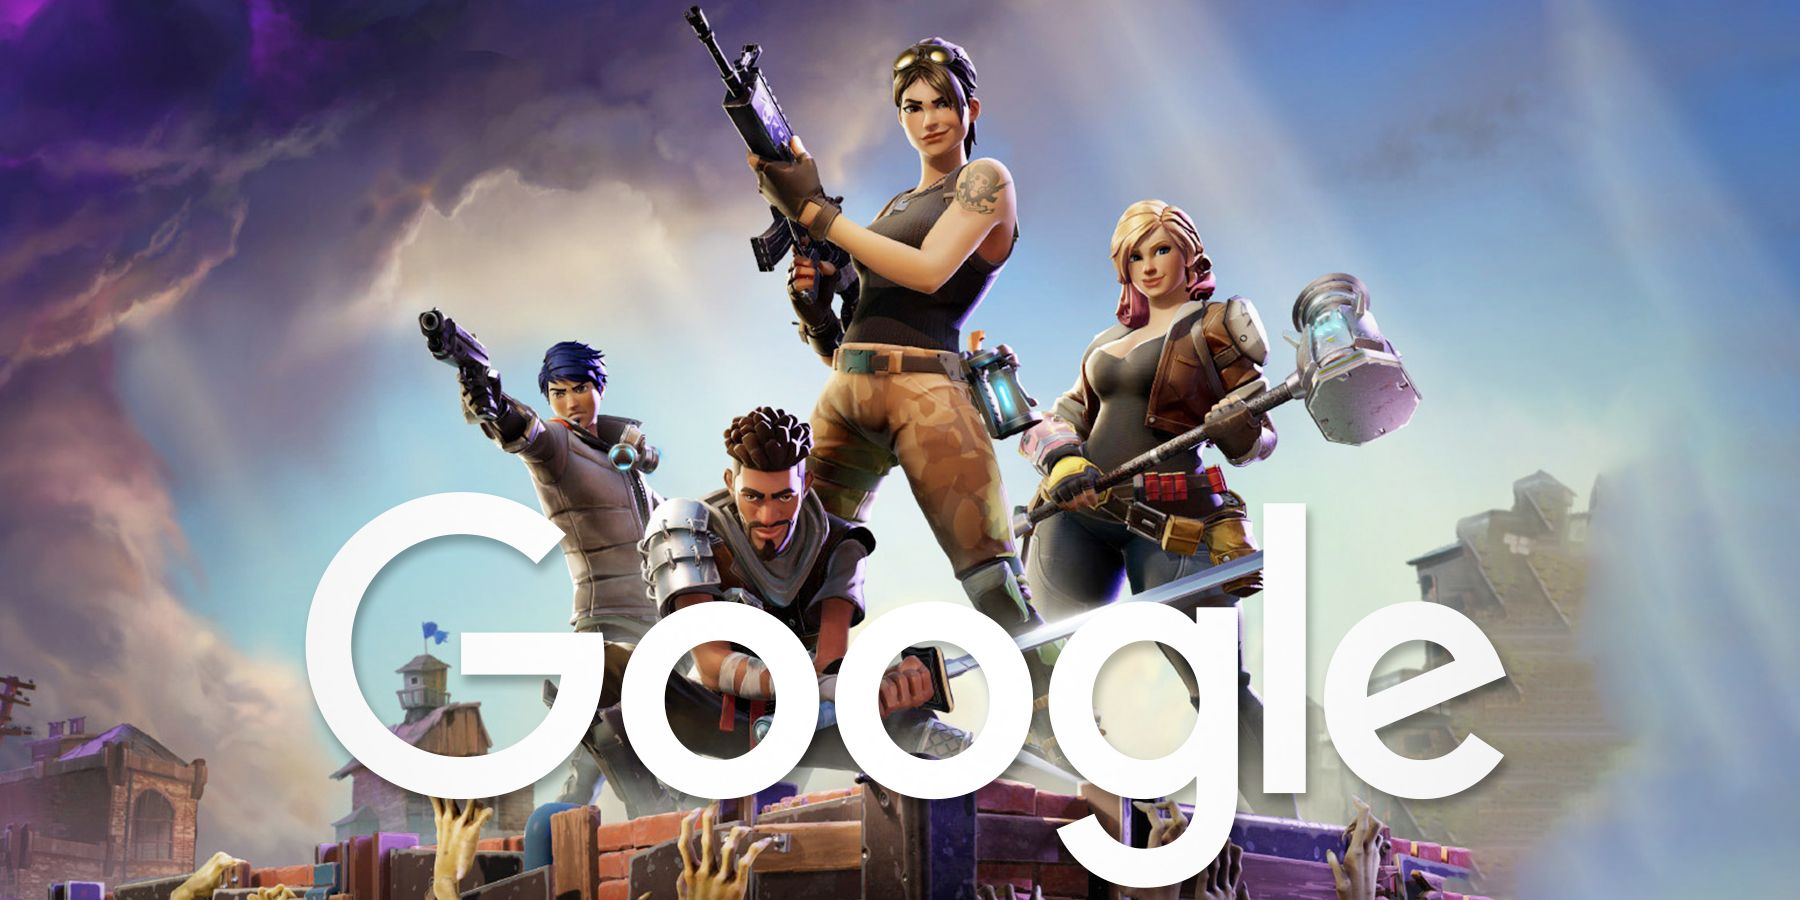 You can now download Fortnite from the Google Play Store - Tech Advisor